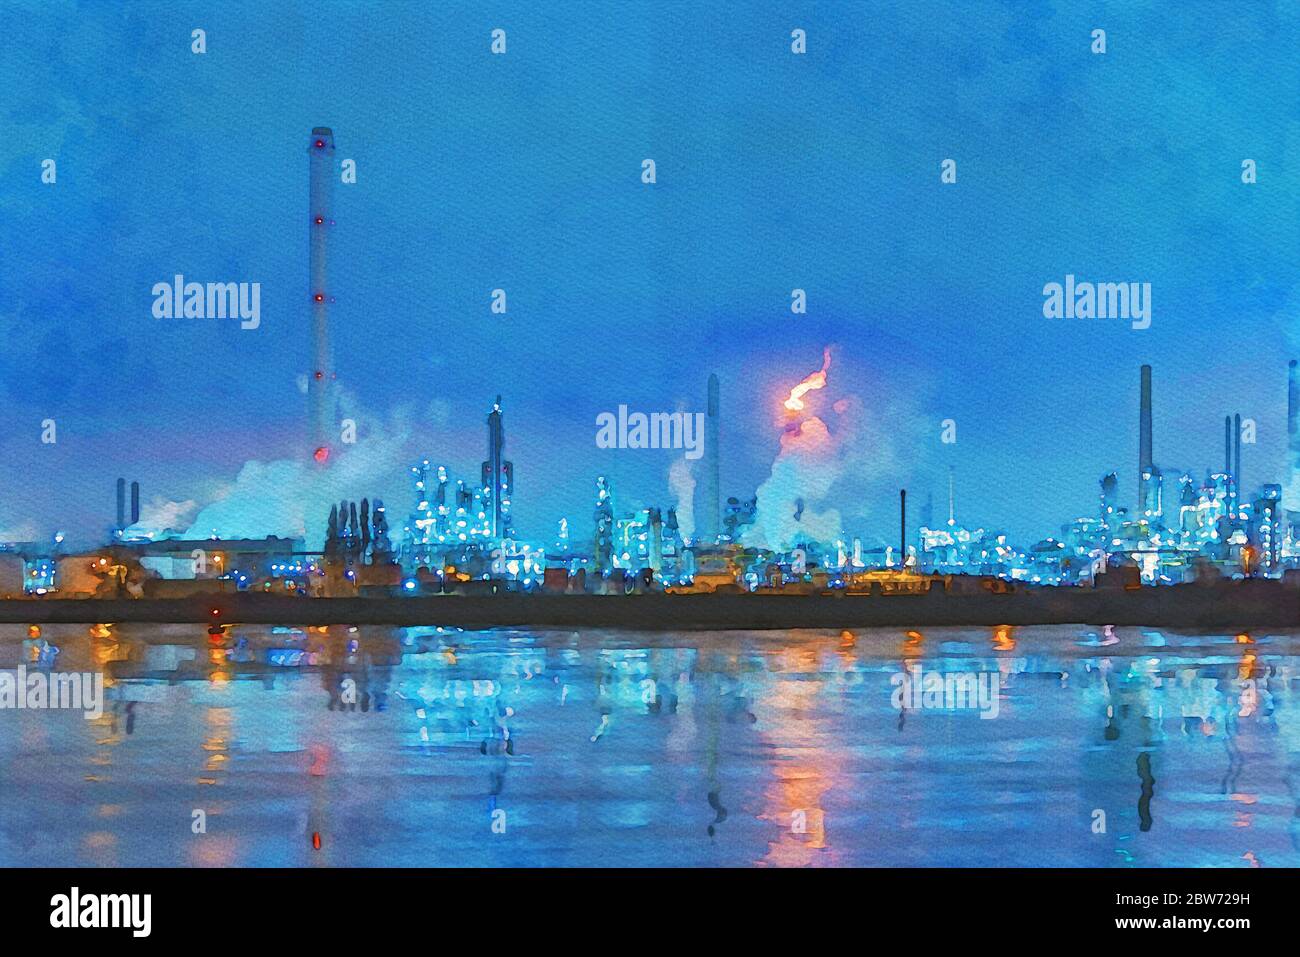 Digital watercolor painting of the refineries reflection and its chimney during the on fire sunset golden hour moment at Rotterdam, Netherlands Stock Photo